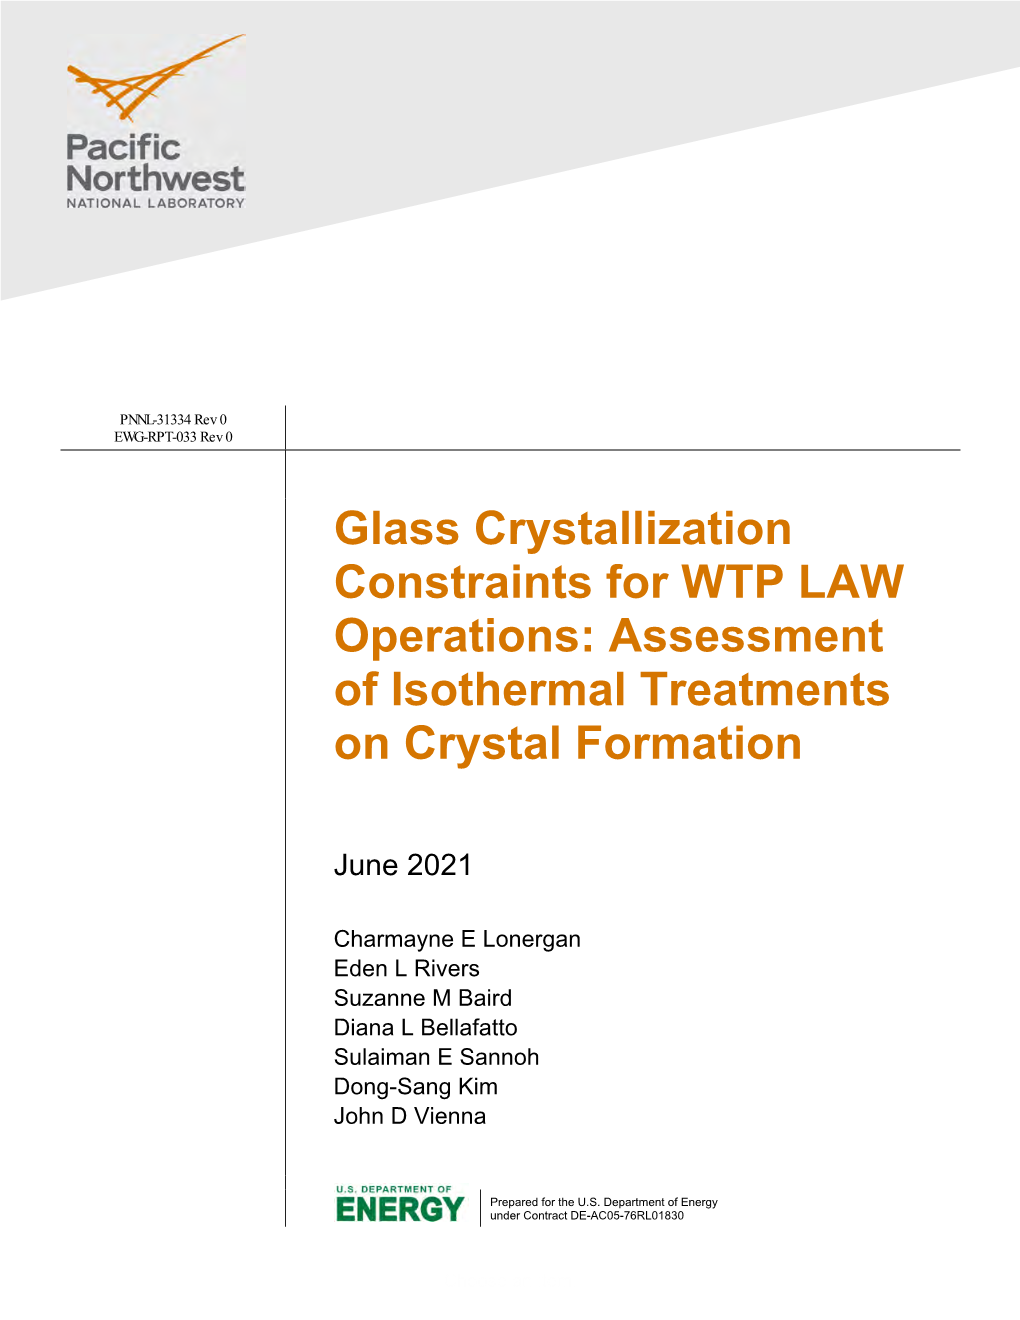 Glass Crystallization Constraints for WTP LAW Operations: Assessment of Isothermal Treatments on Crystal Formation